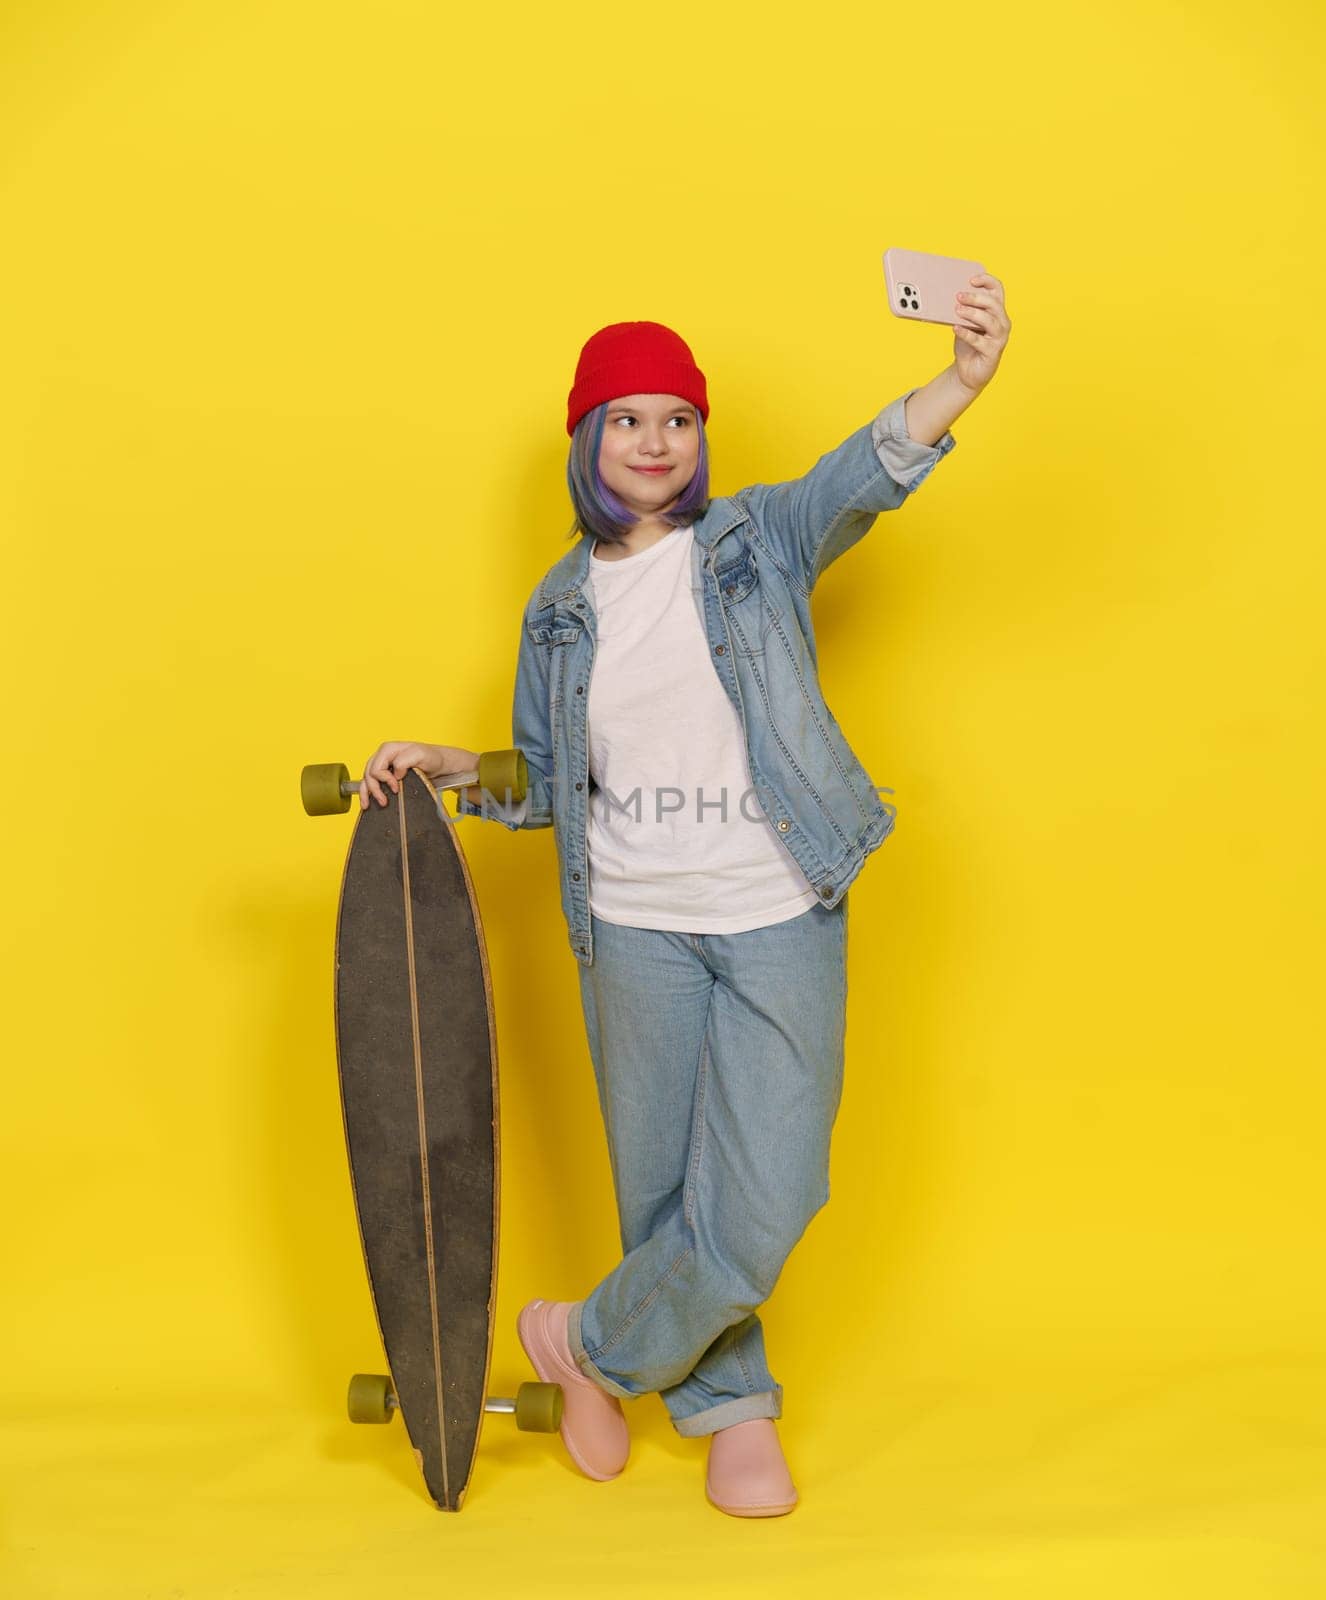 Stylish Teen With Longboard Make Selfie, Girl In Red Hat With Skateboard And Mobile Phone On Yellow Background. Teenager Immersed In Contemporary Lifestyle Of Skateboarding And Digital Connectivity. by LipikStockMedia